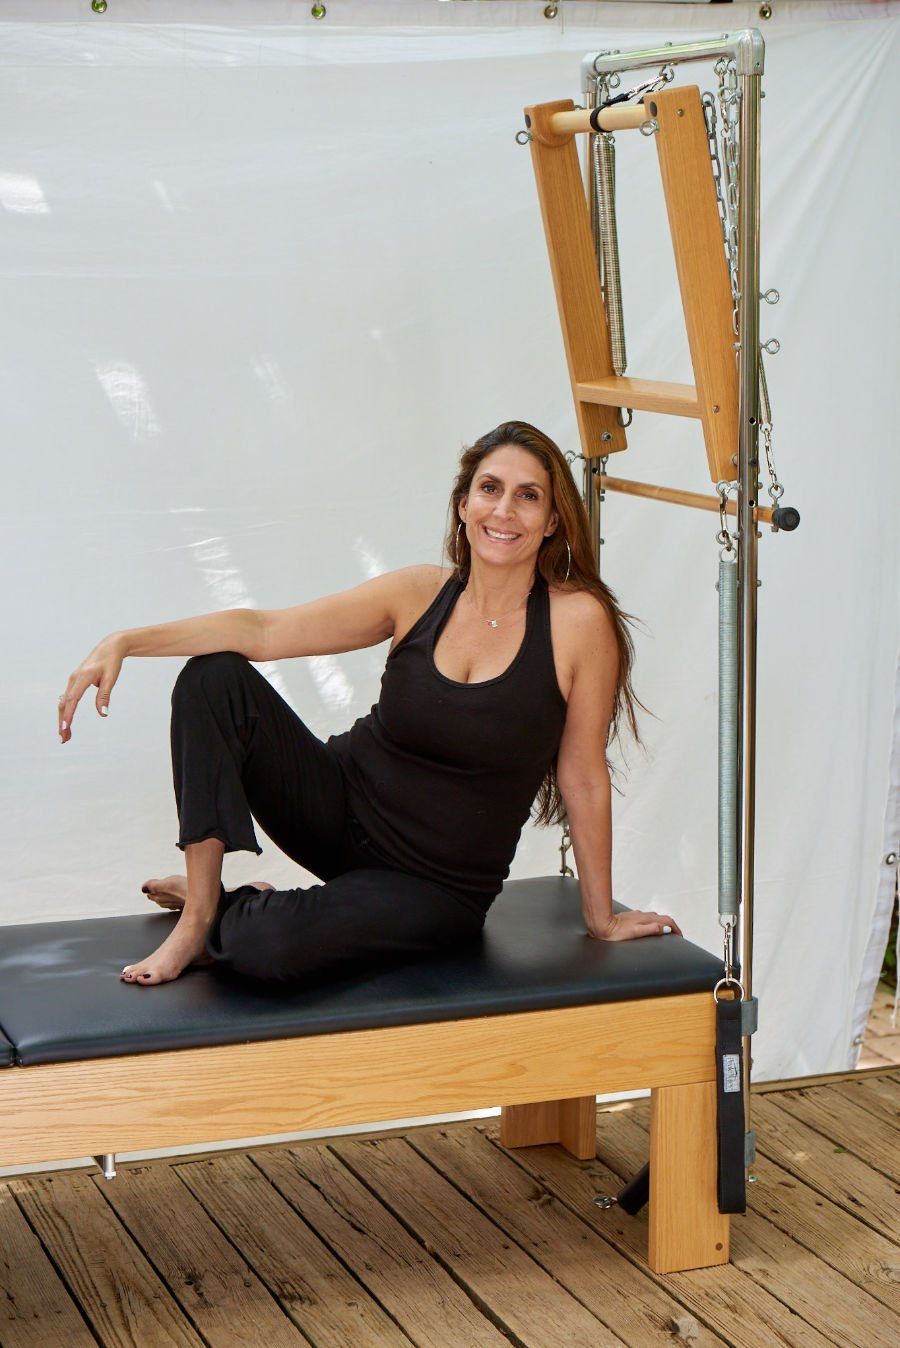 Maria is sitting on a wooden pilates machine .